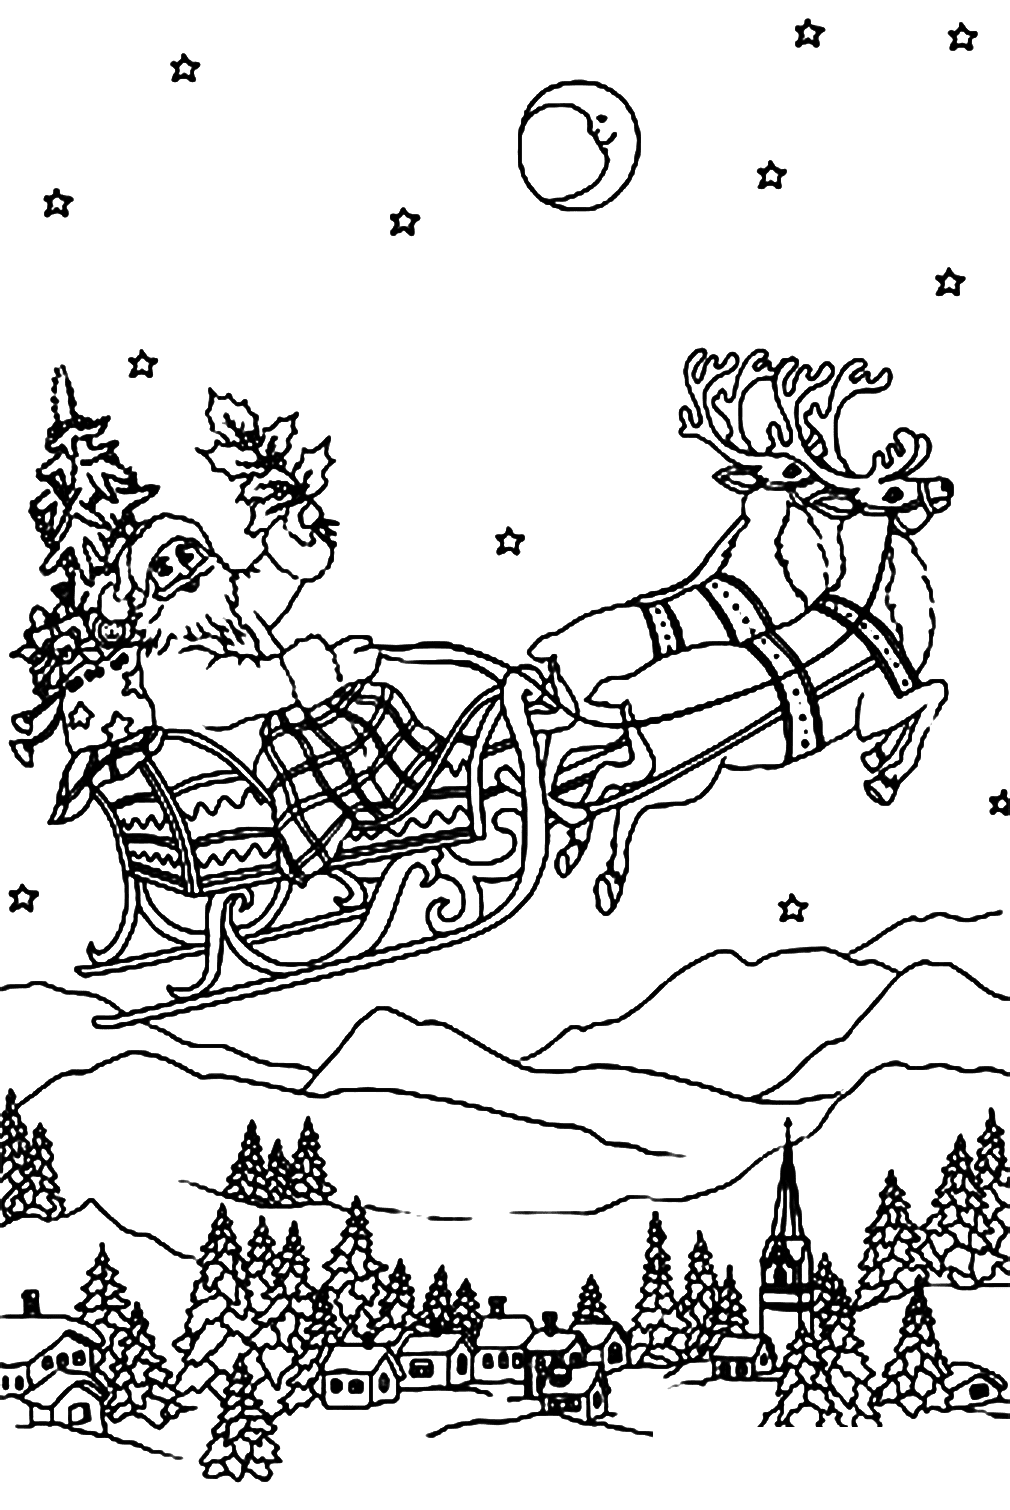 Santa Flying with His Reindeers on Sleigh at Night Coloring Page